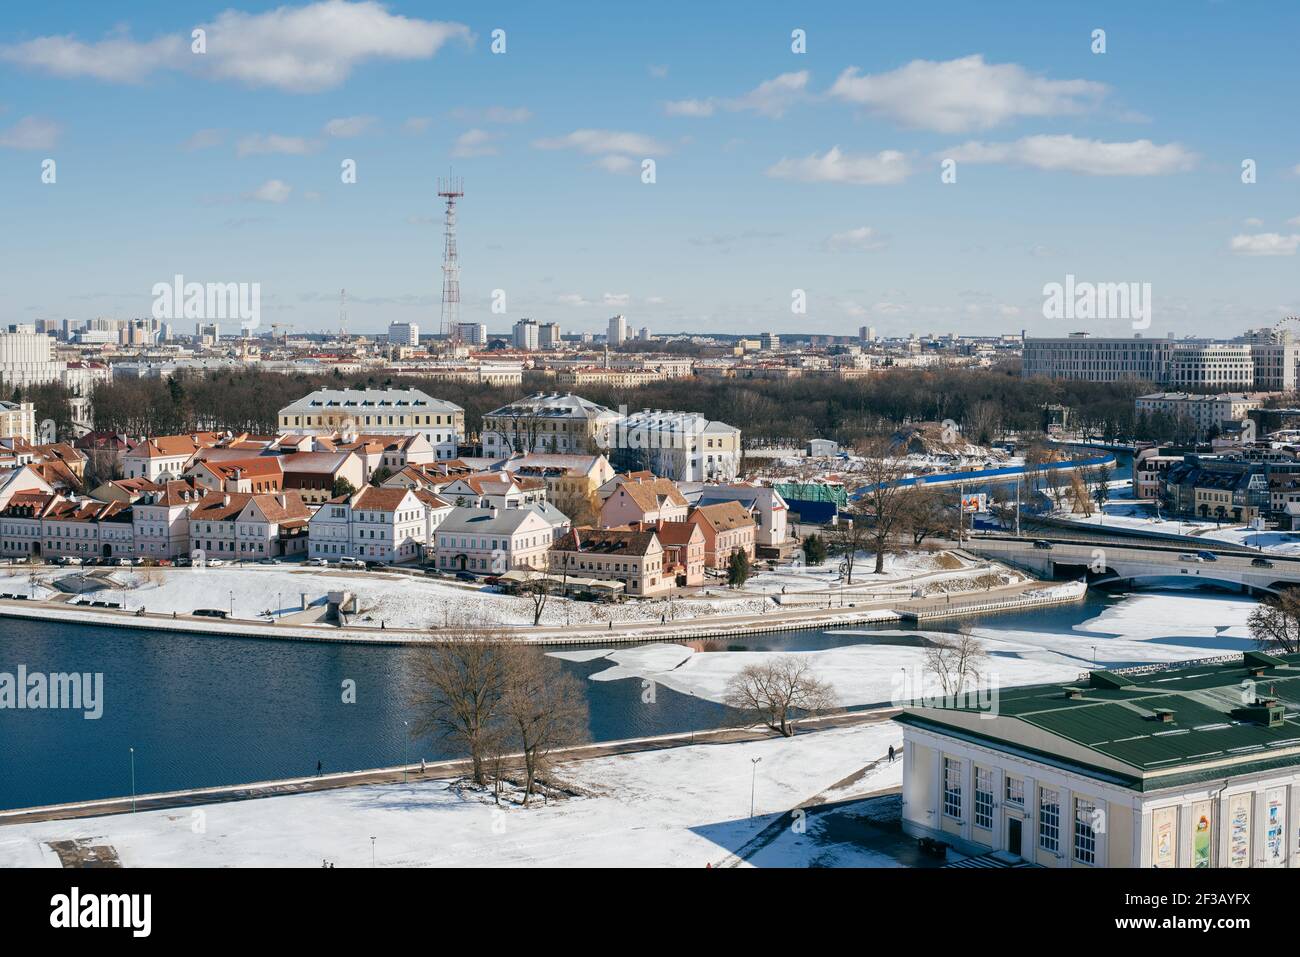 View of sunny Minsk Belarus from a height Stock Photo